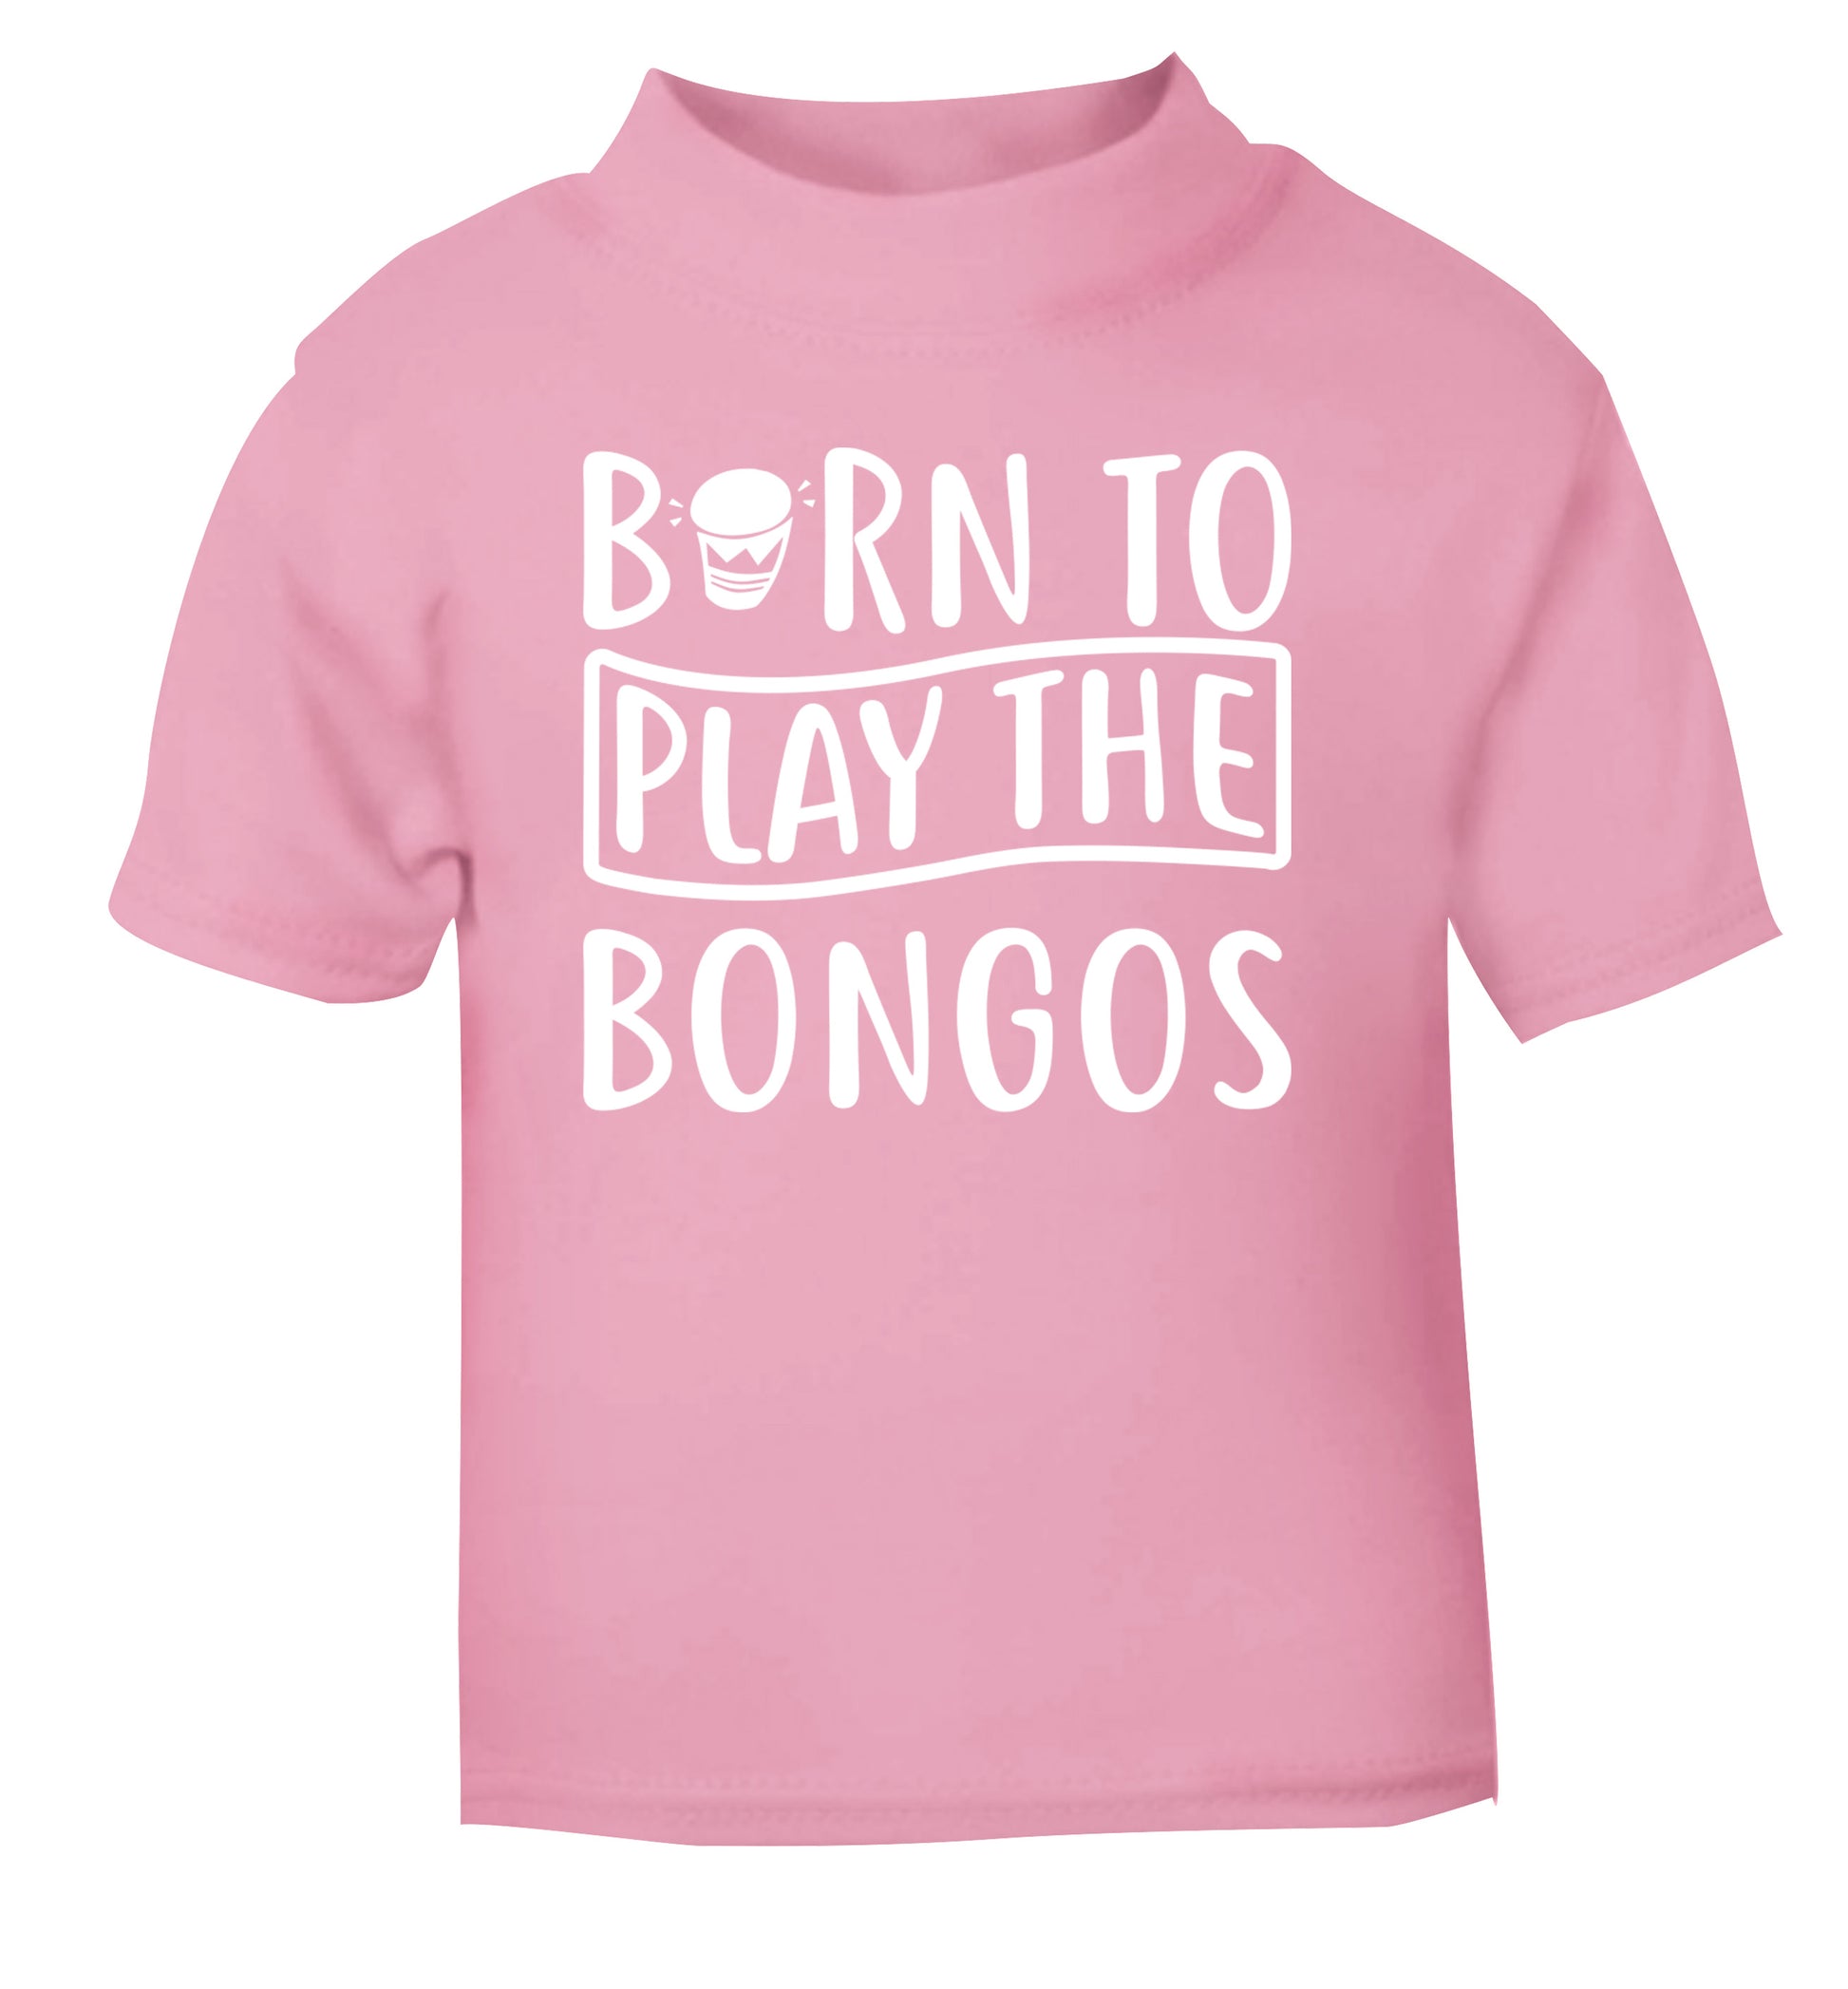 Born to play the bongos light pink Baby Toddler Tshirt 2 Years